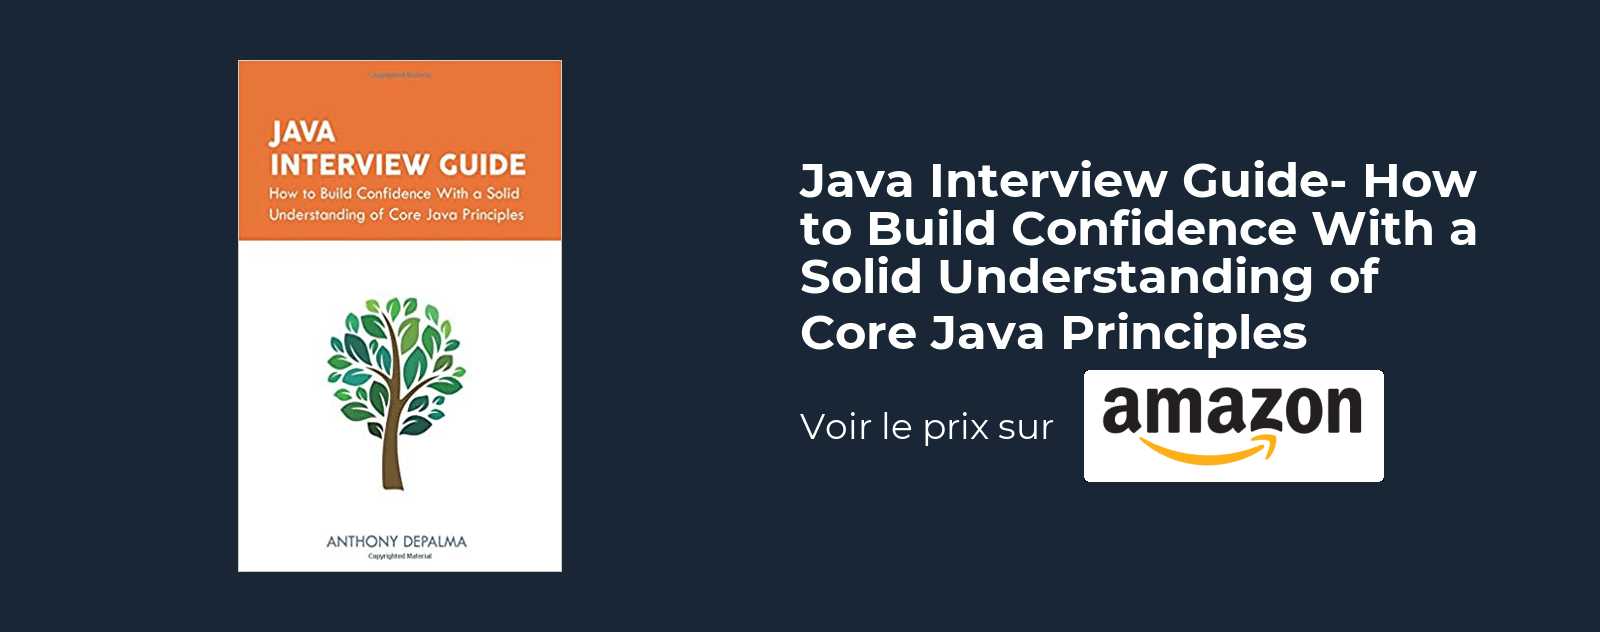 Java Interview Guide- How to Build Confidence With a Solid Understanding of Core Java Principles